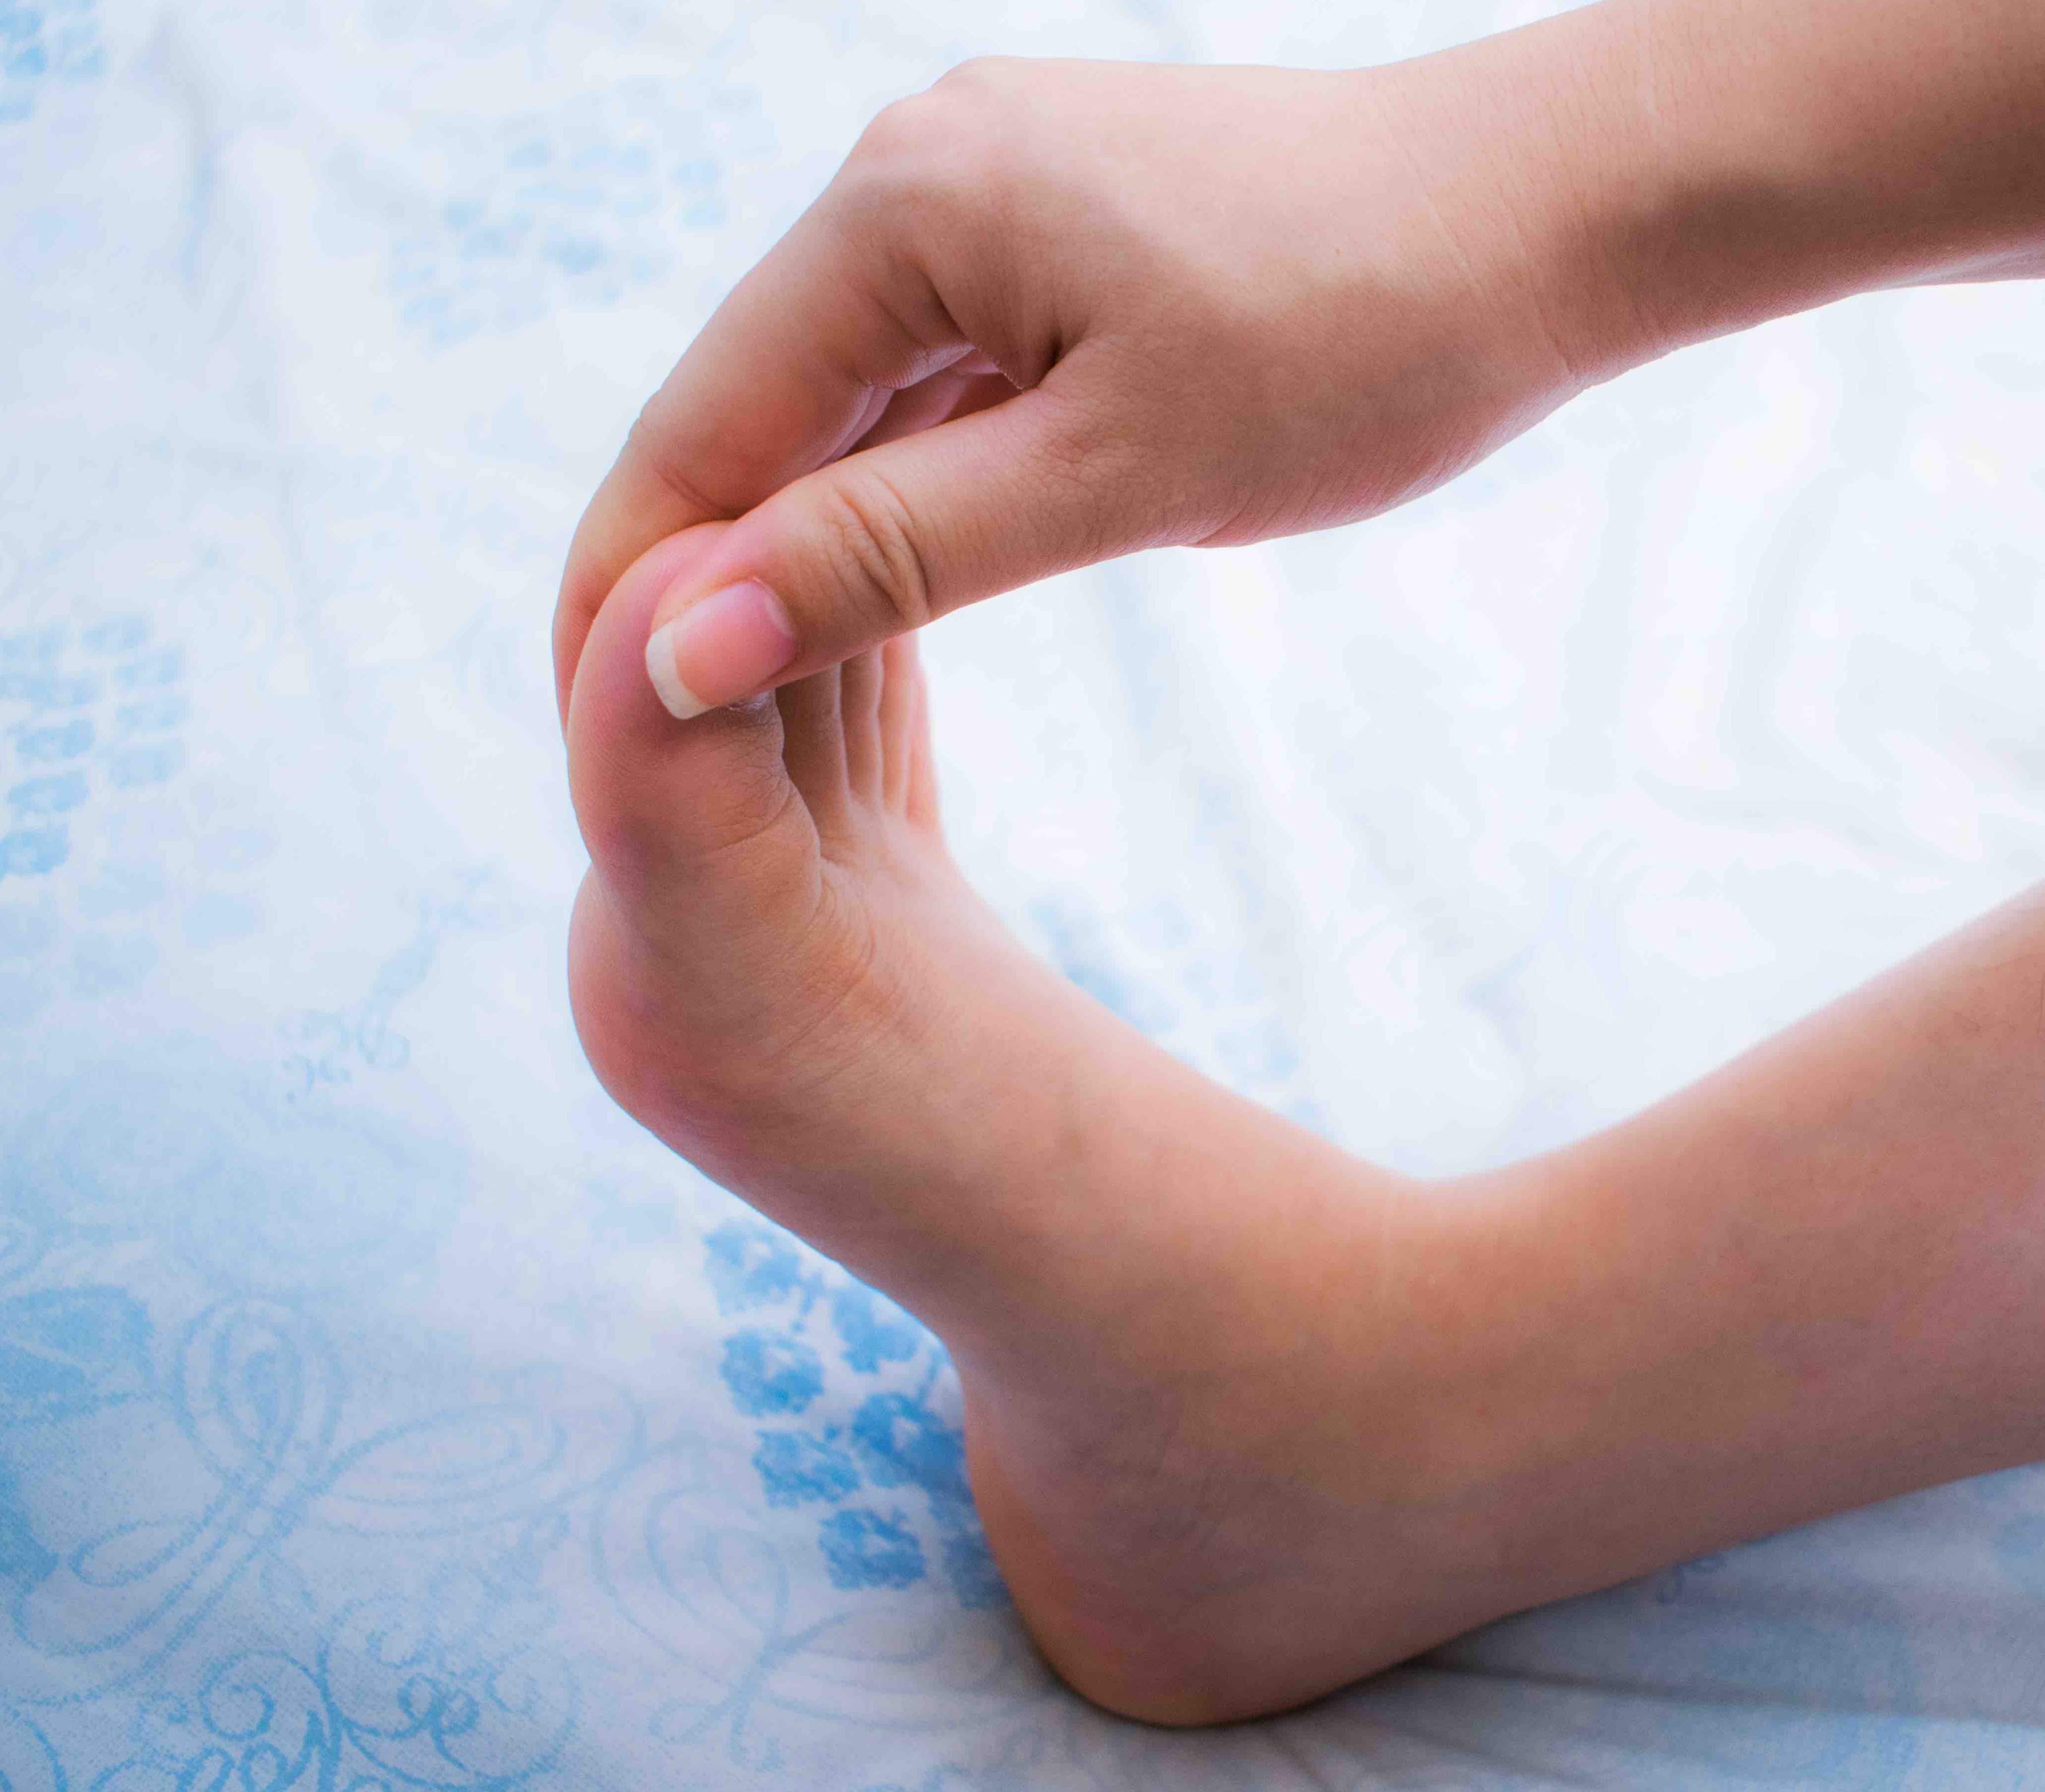 Numbness In Your Toes: What Does it Mean?